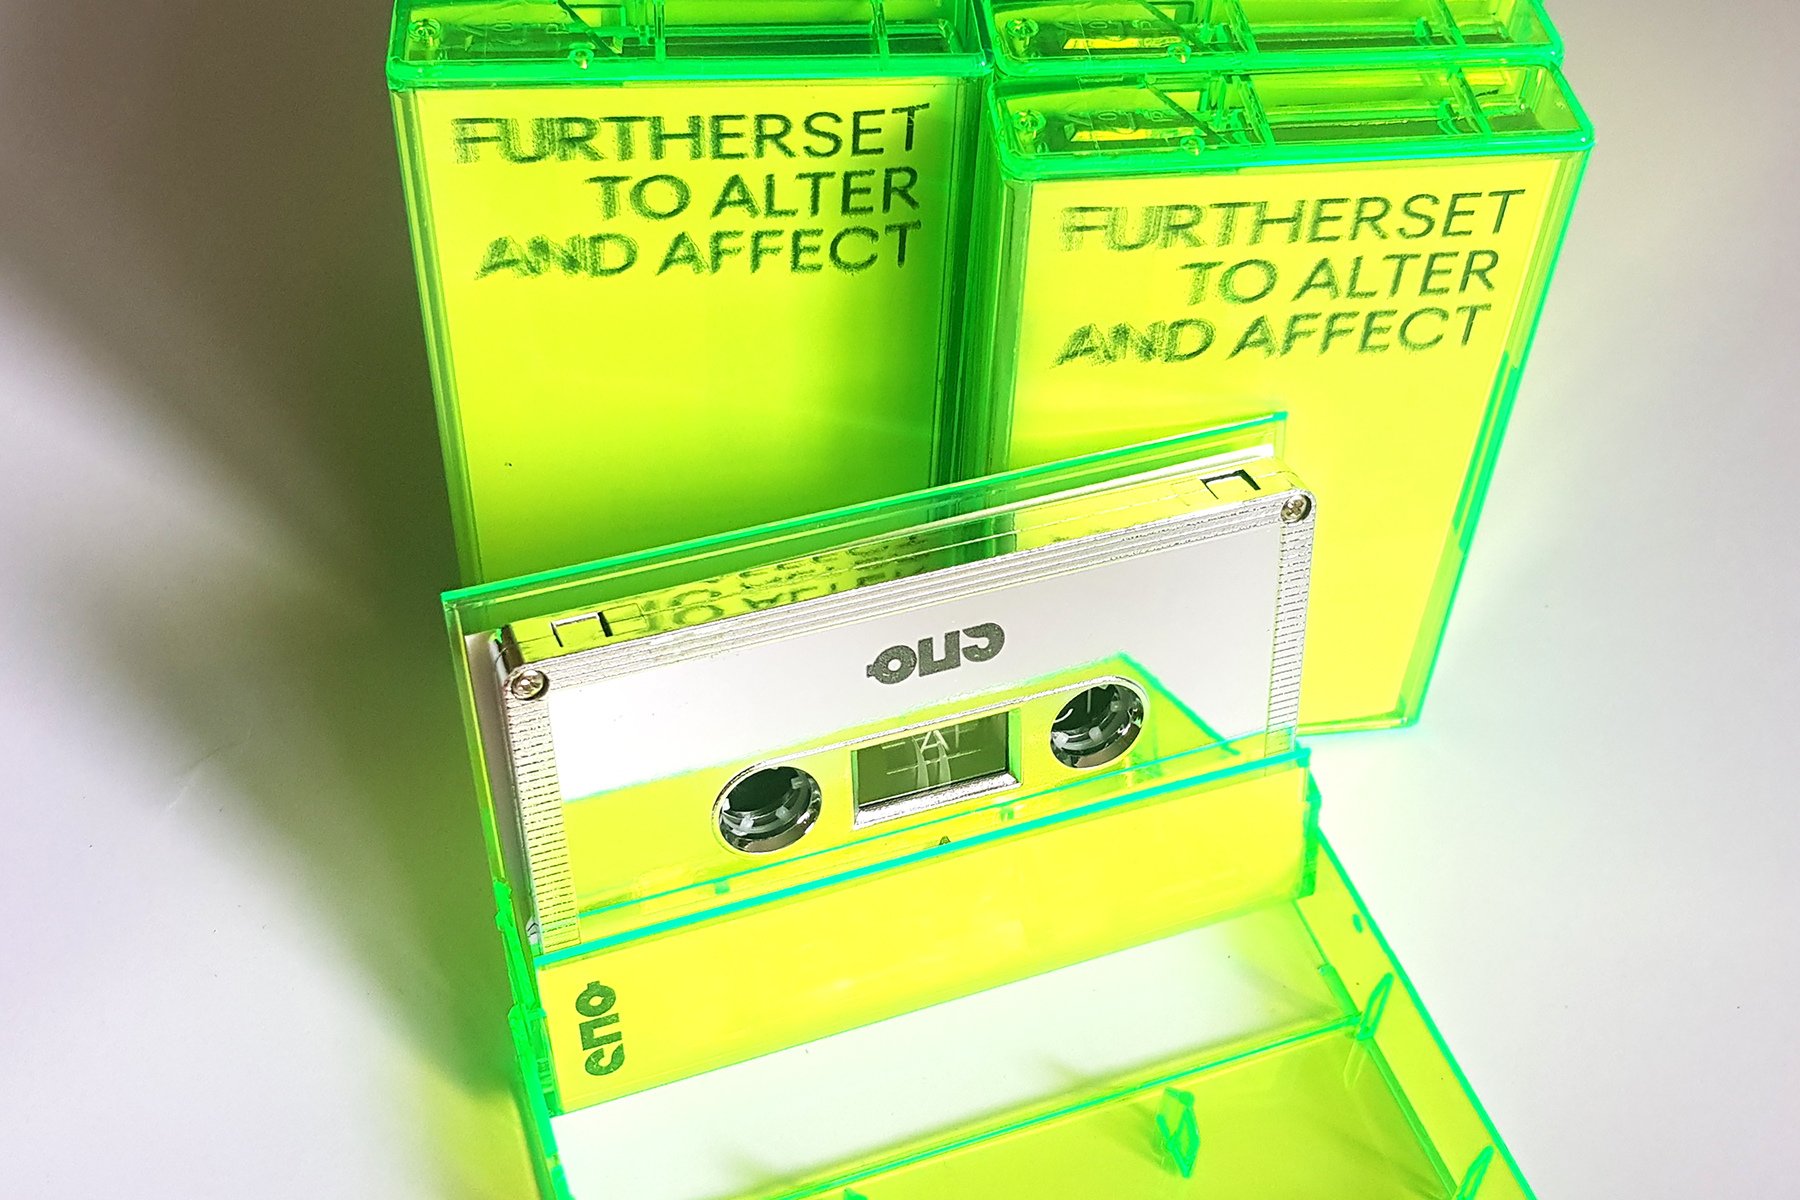 Furtherset's tape for -OUS